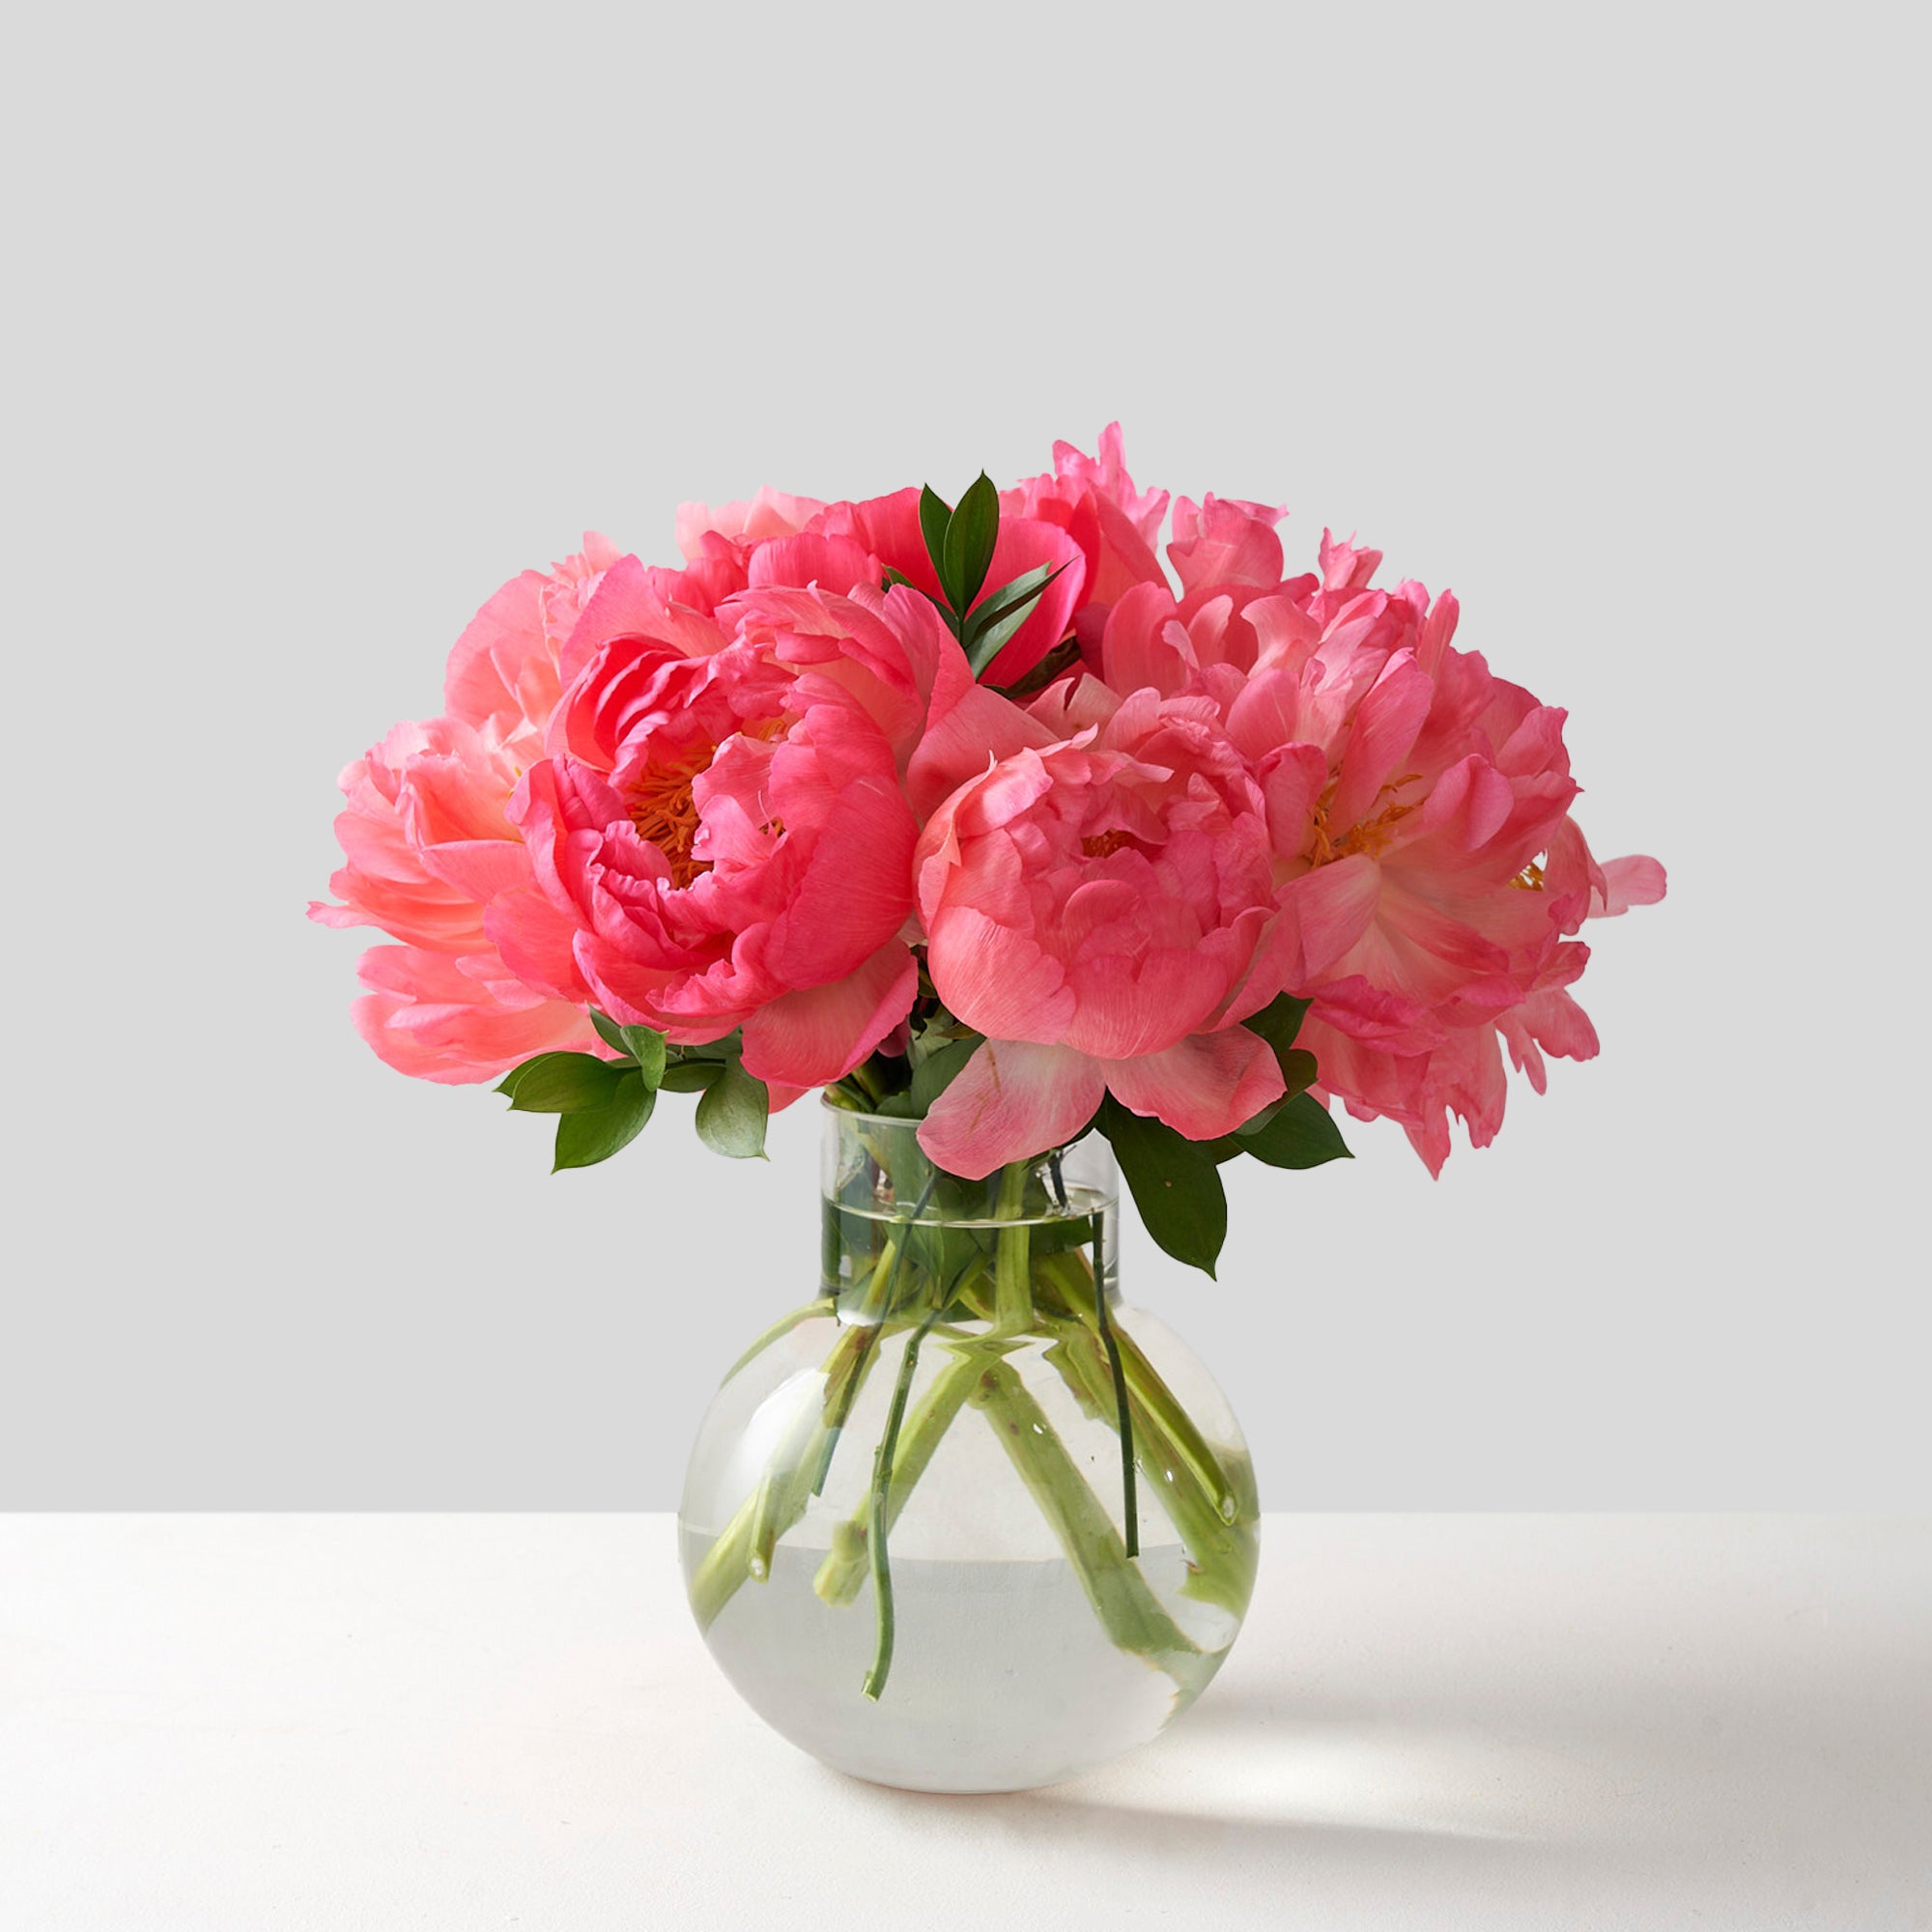 Coral sunset peonies with greenery in a round clear glass vase